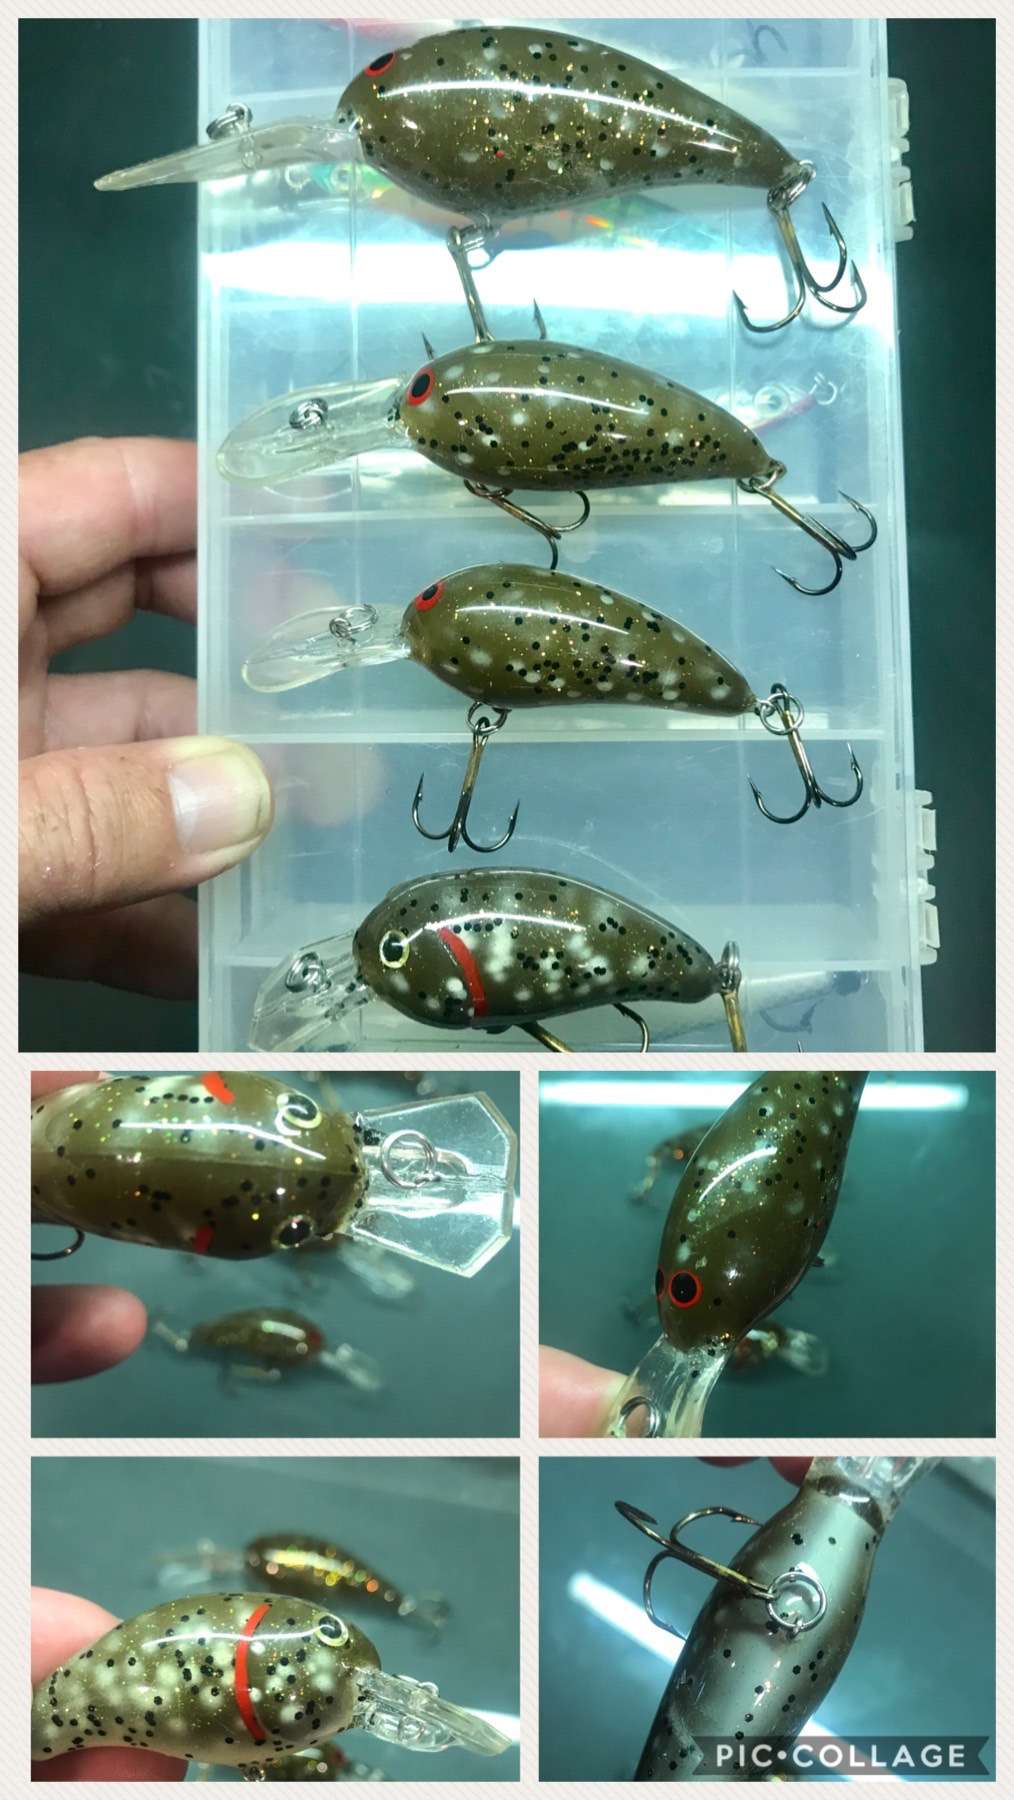 Need a Norman Crank expert assist - Fishing Tackle - Bass Fishing Forums